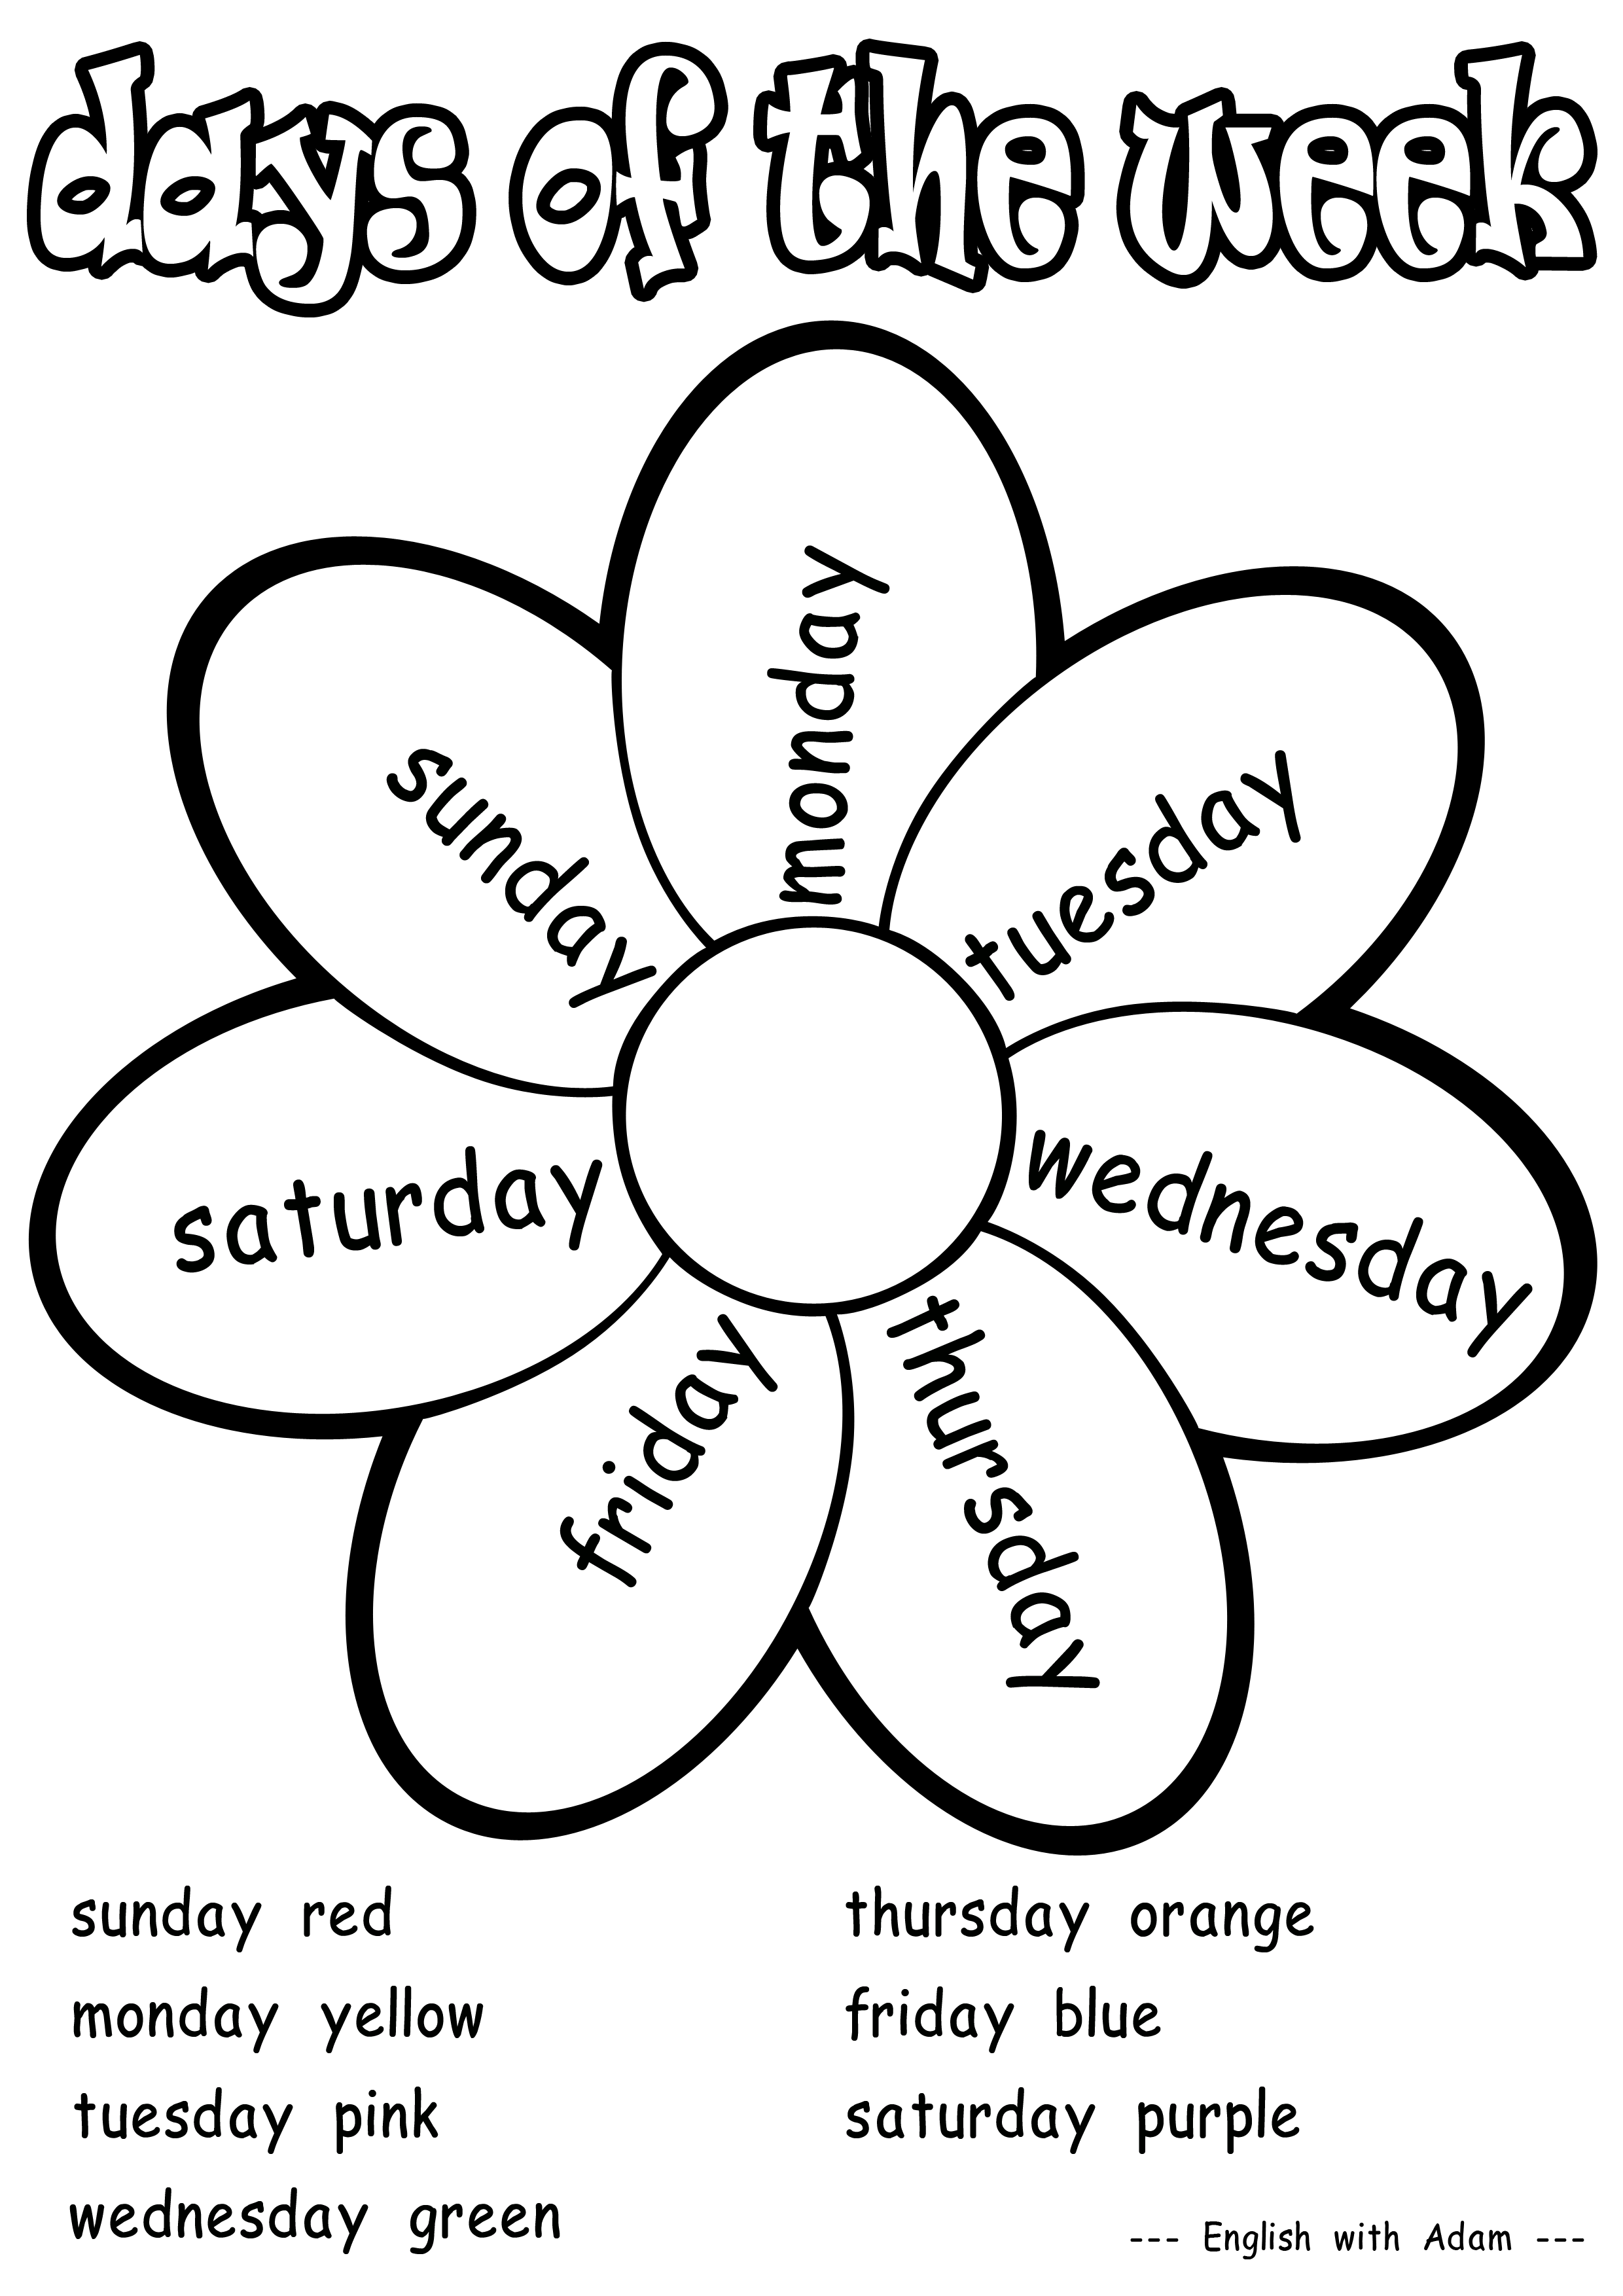 Days of the Week Worksheets Coloring